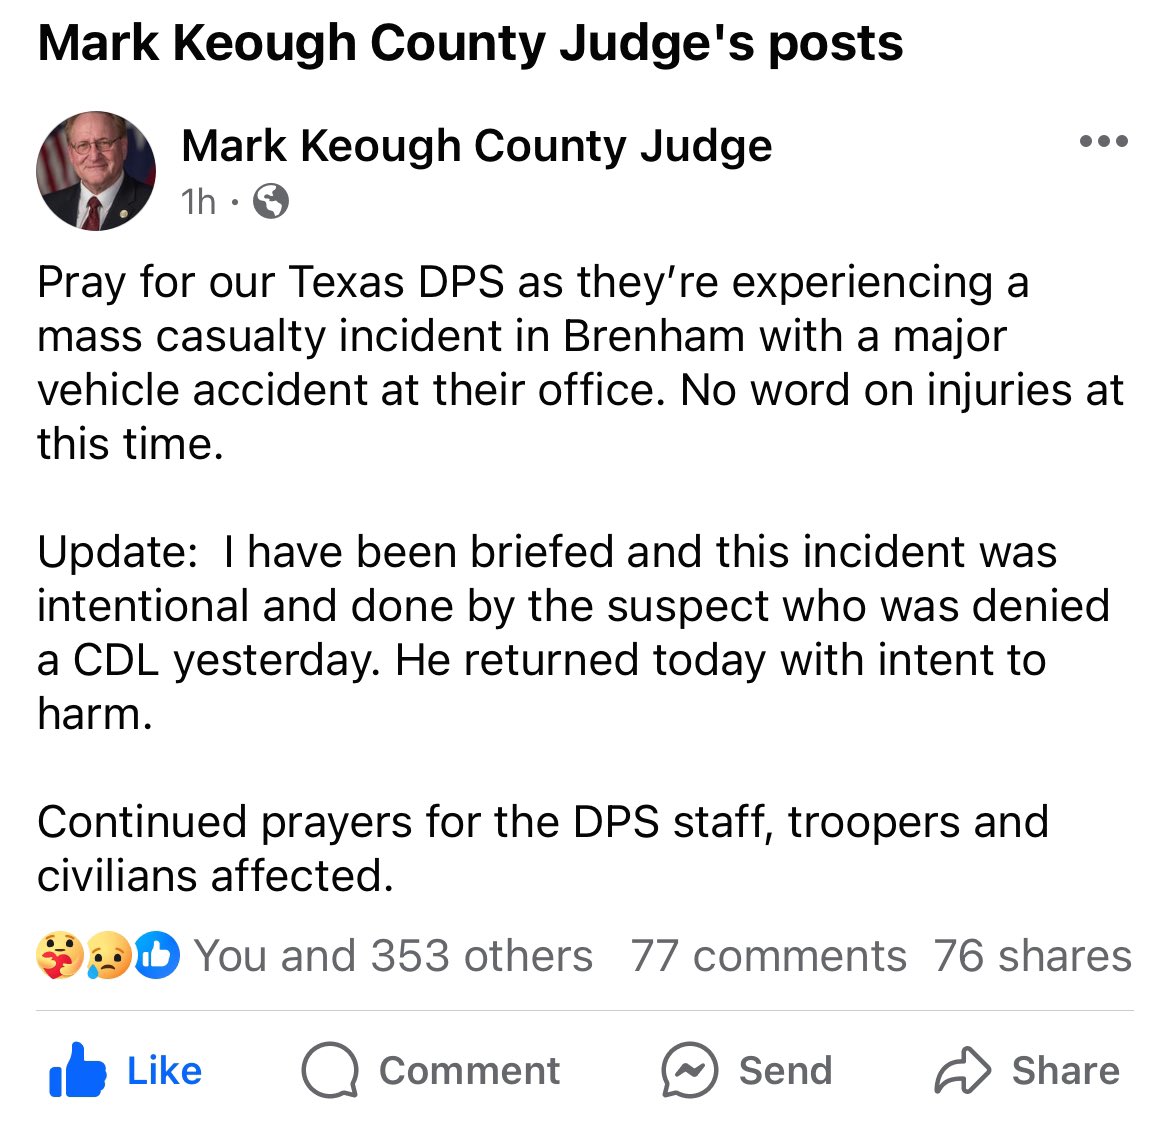 #BreakingNews: A man intentionally drove an 18-wheeler into a Texas DPS building in Brenham, Texas. County Judge Mark Keough says the driver was denied a CDL (Class of Commercial Driver License) on Thursday and returned today to cause harm. @KPRC2